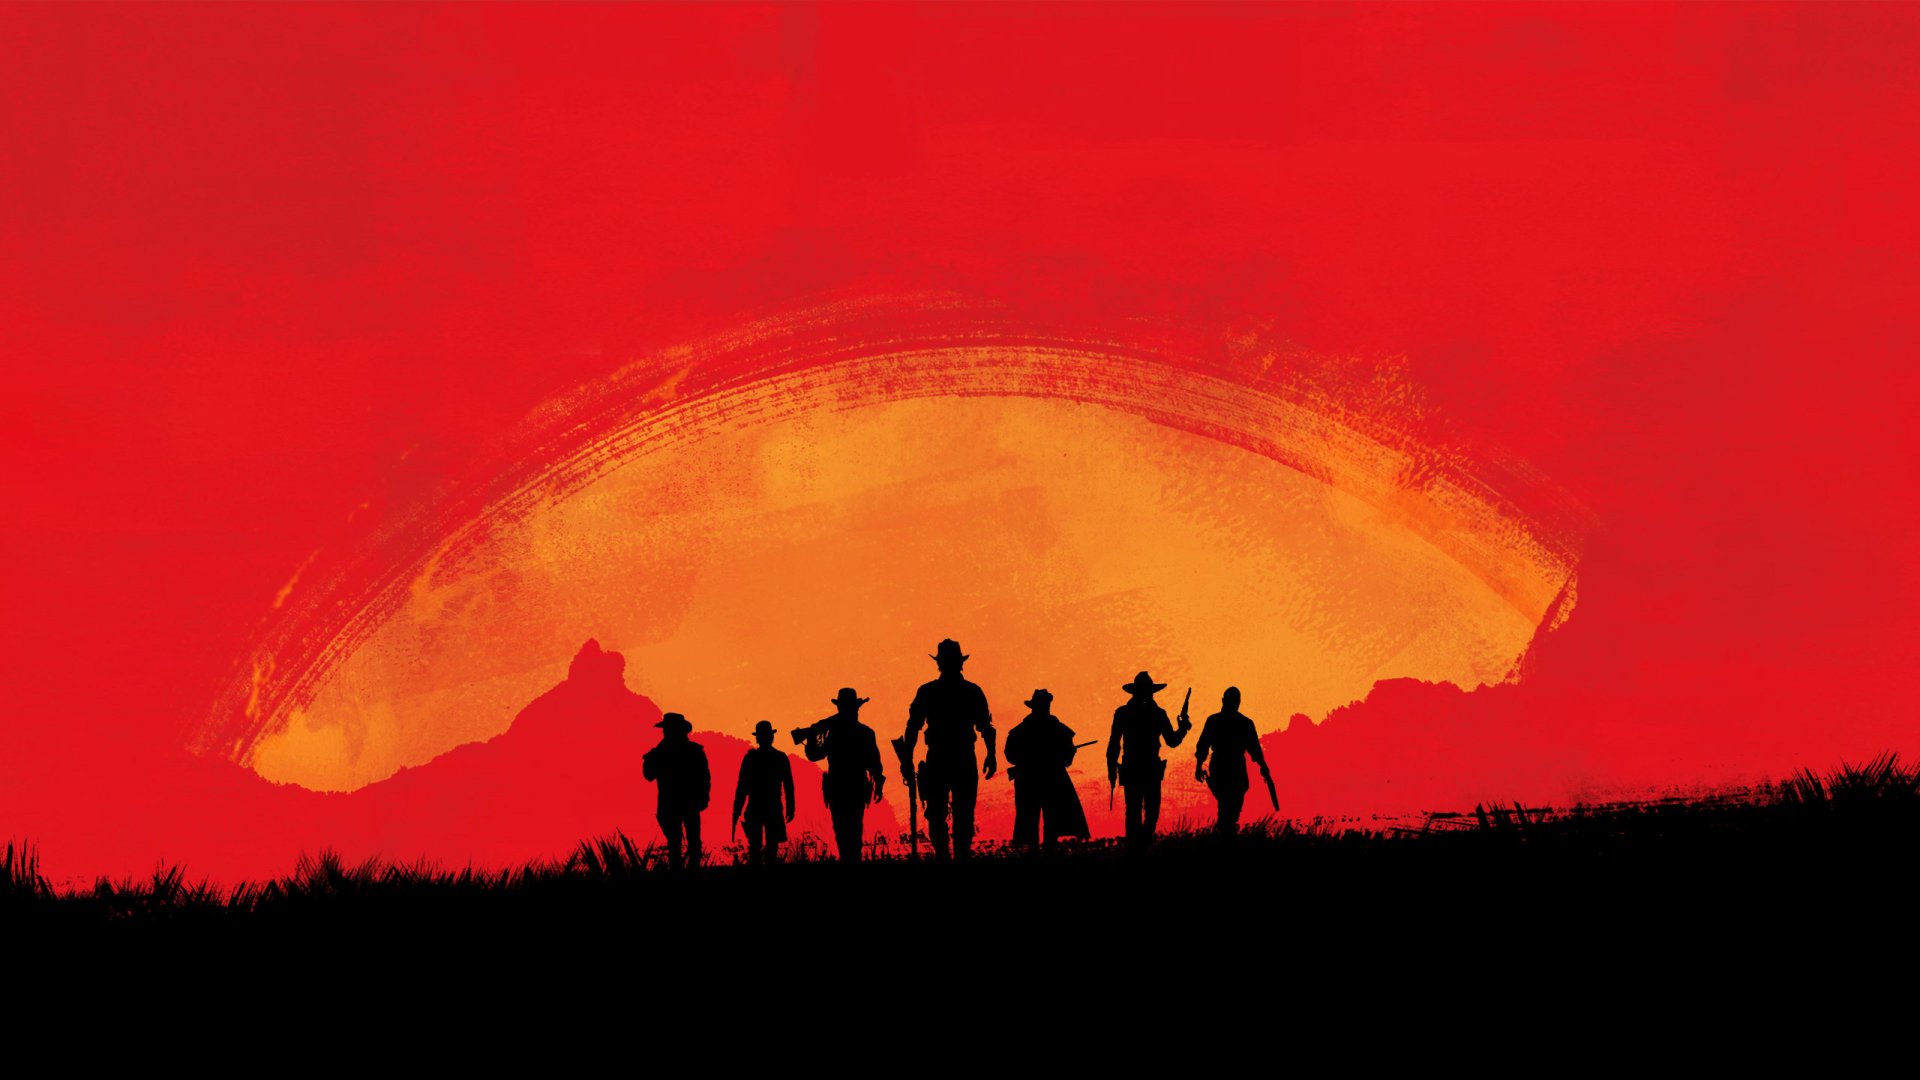 Red Dead Redemption New Tab